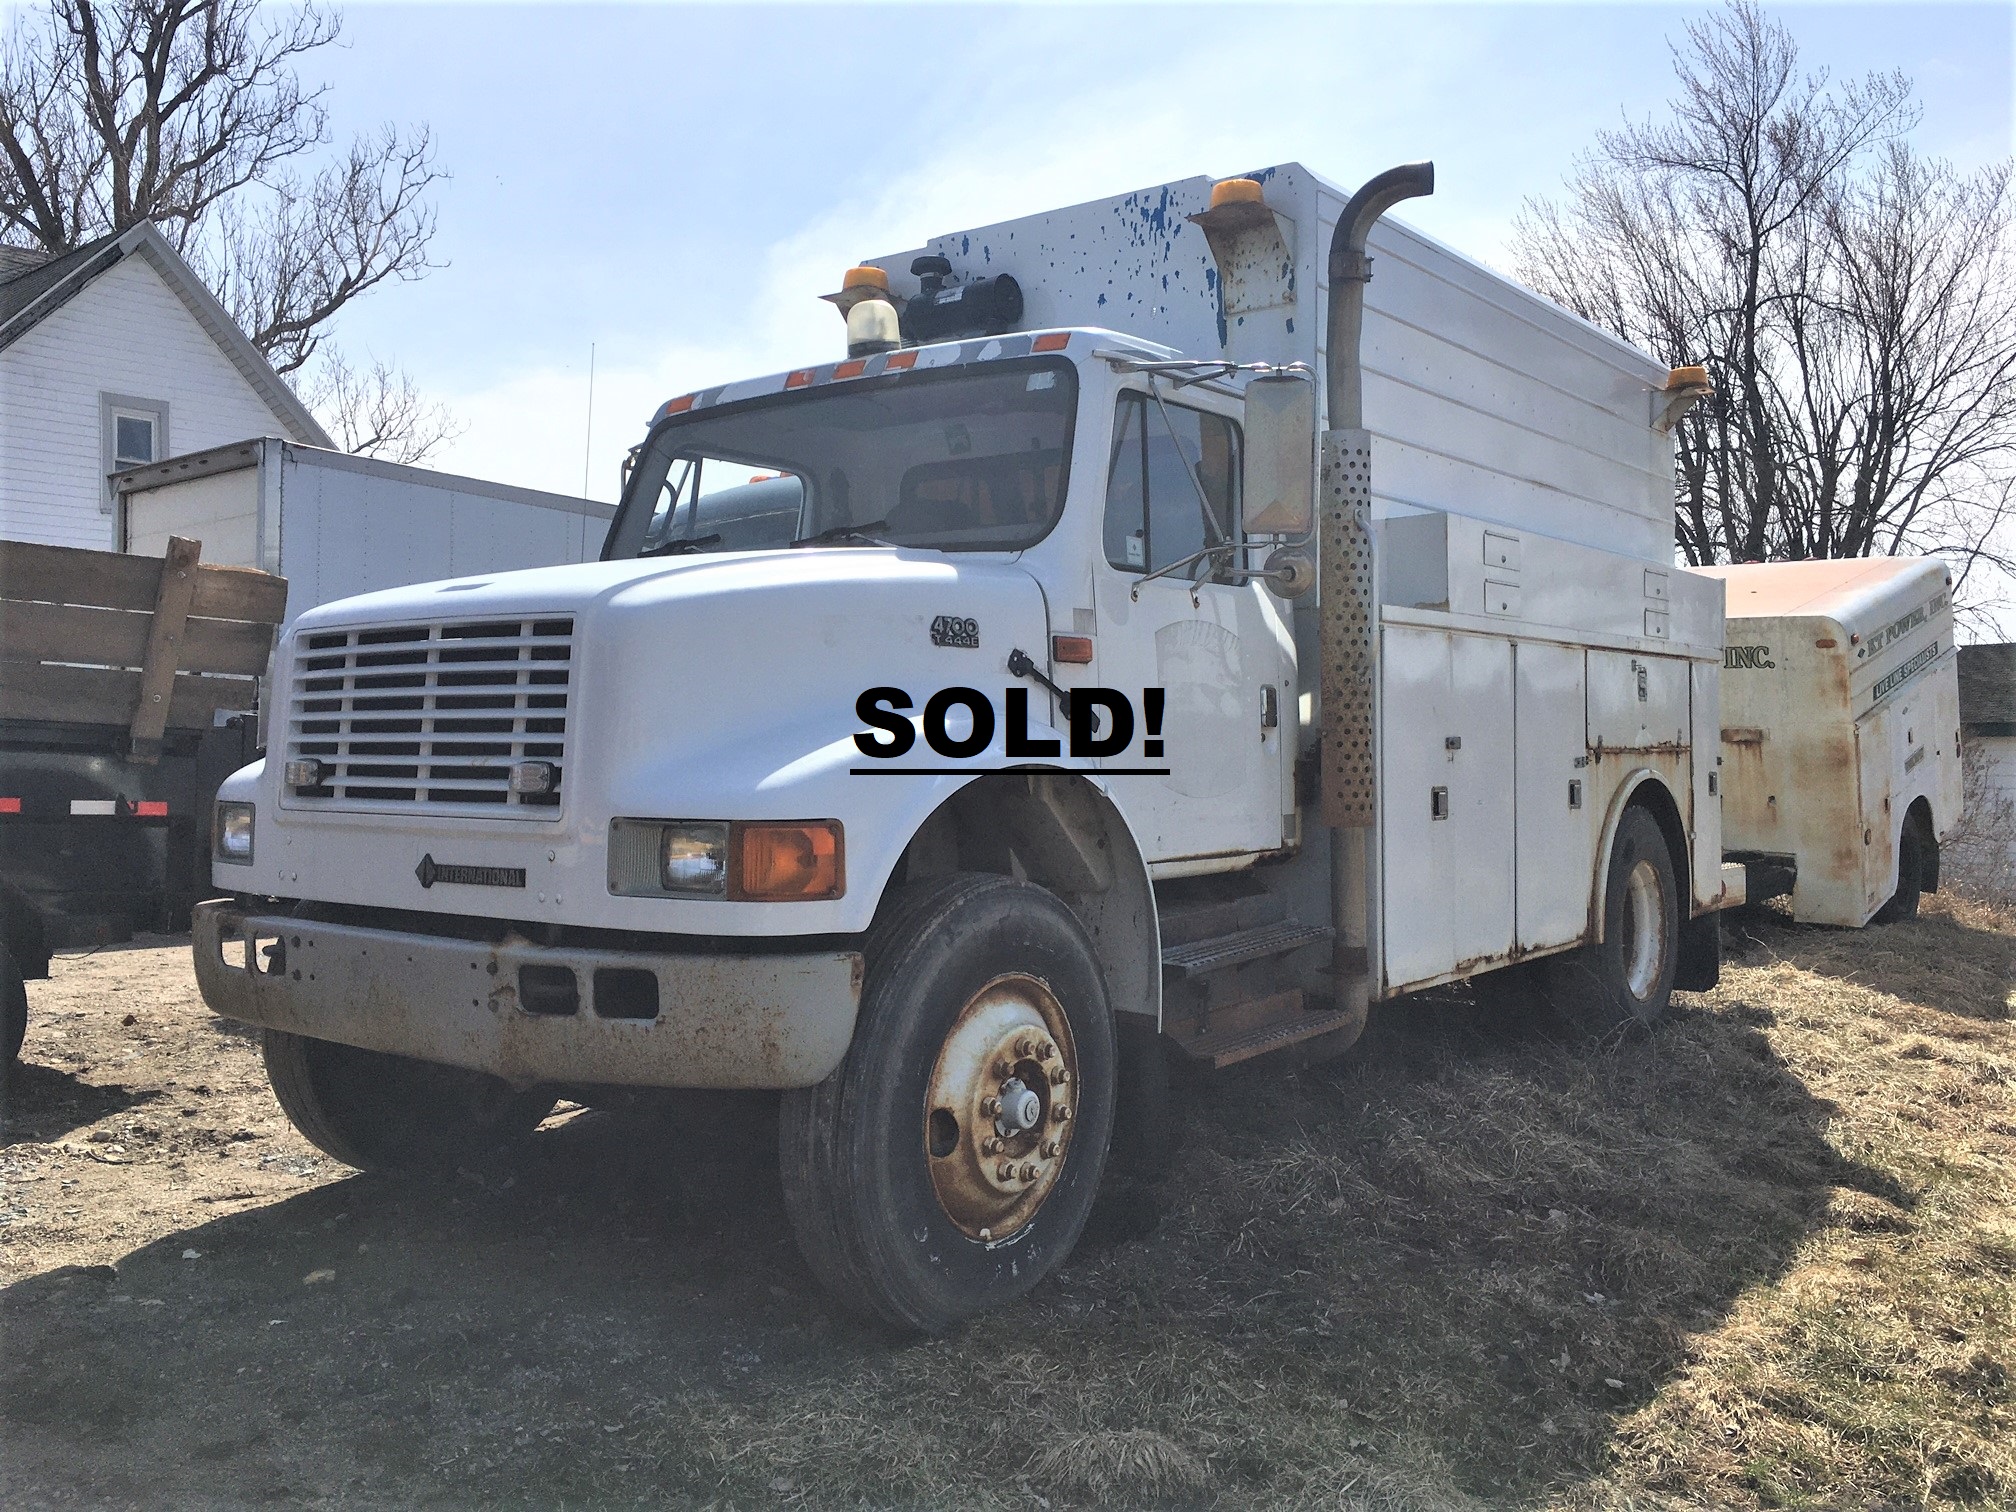 International 4700 Service Truck. 2005 T444E 4x2 with a 170" wheel base. The truck has an automatic transmission and 18'251 miles. The truck has a Honda EG 3500 generator and a Boss air compressor model 8060-UBI with 776 hours. It has air break's, service air and air to the rear for towing. It has heat, AC and cruise control.